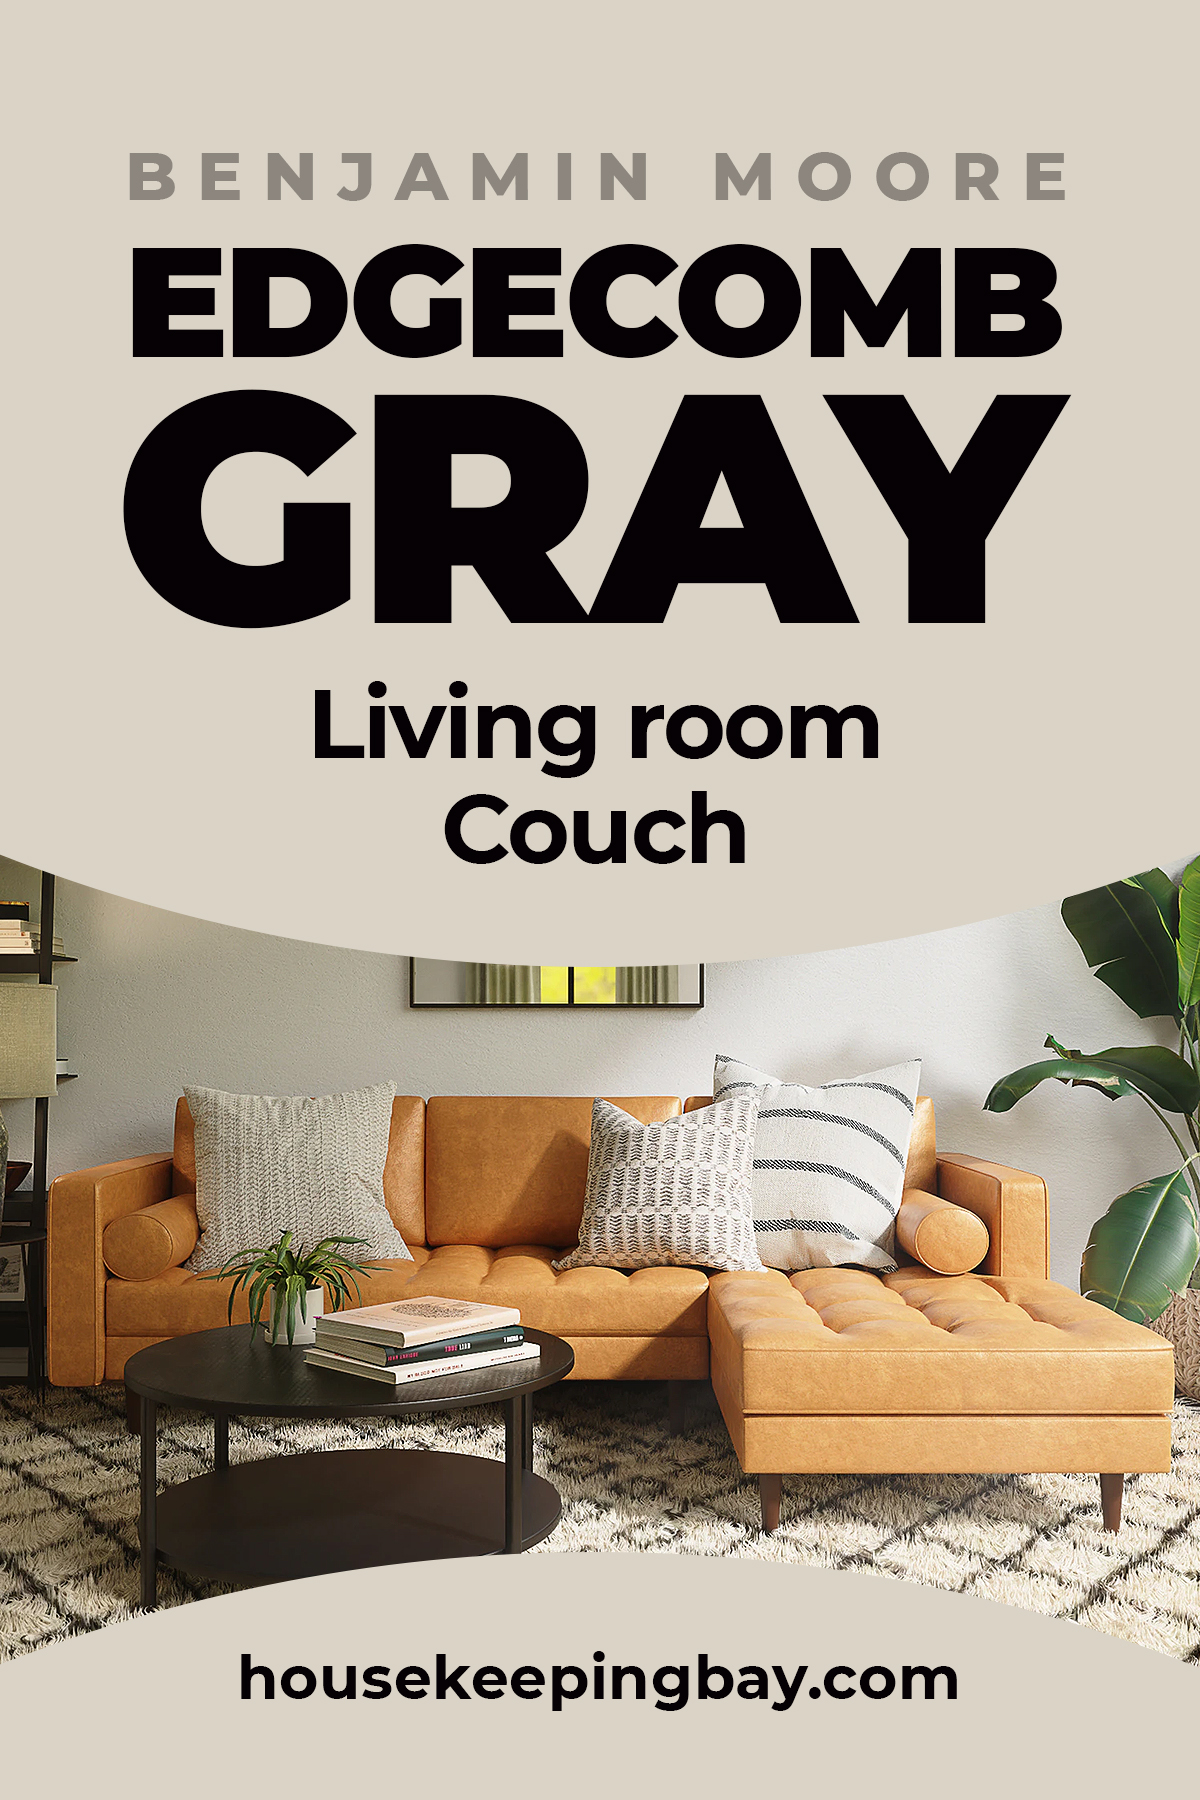 Edgecomb Gray living room couch